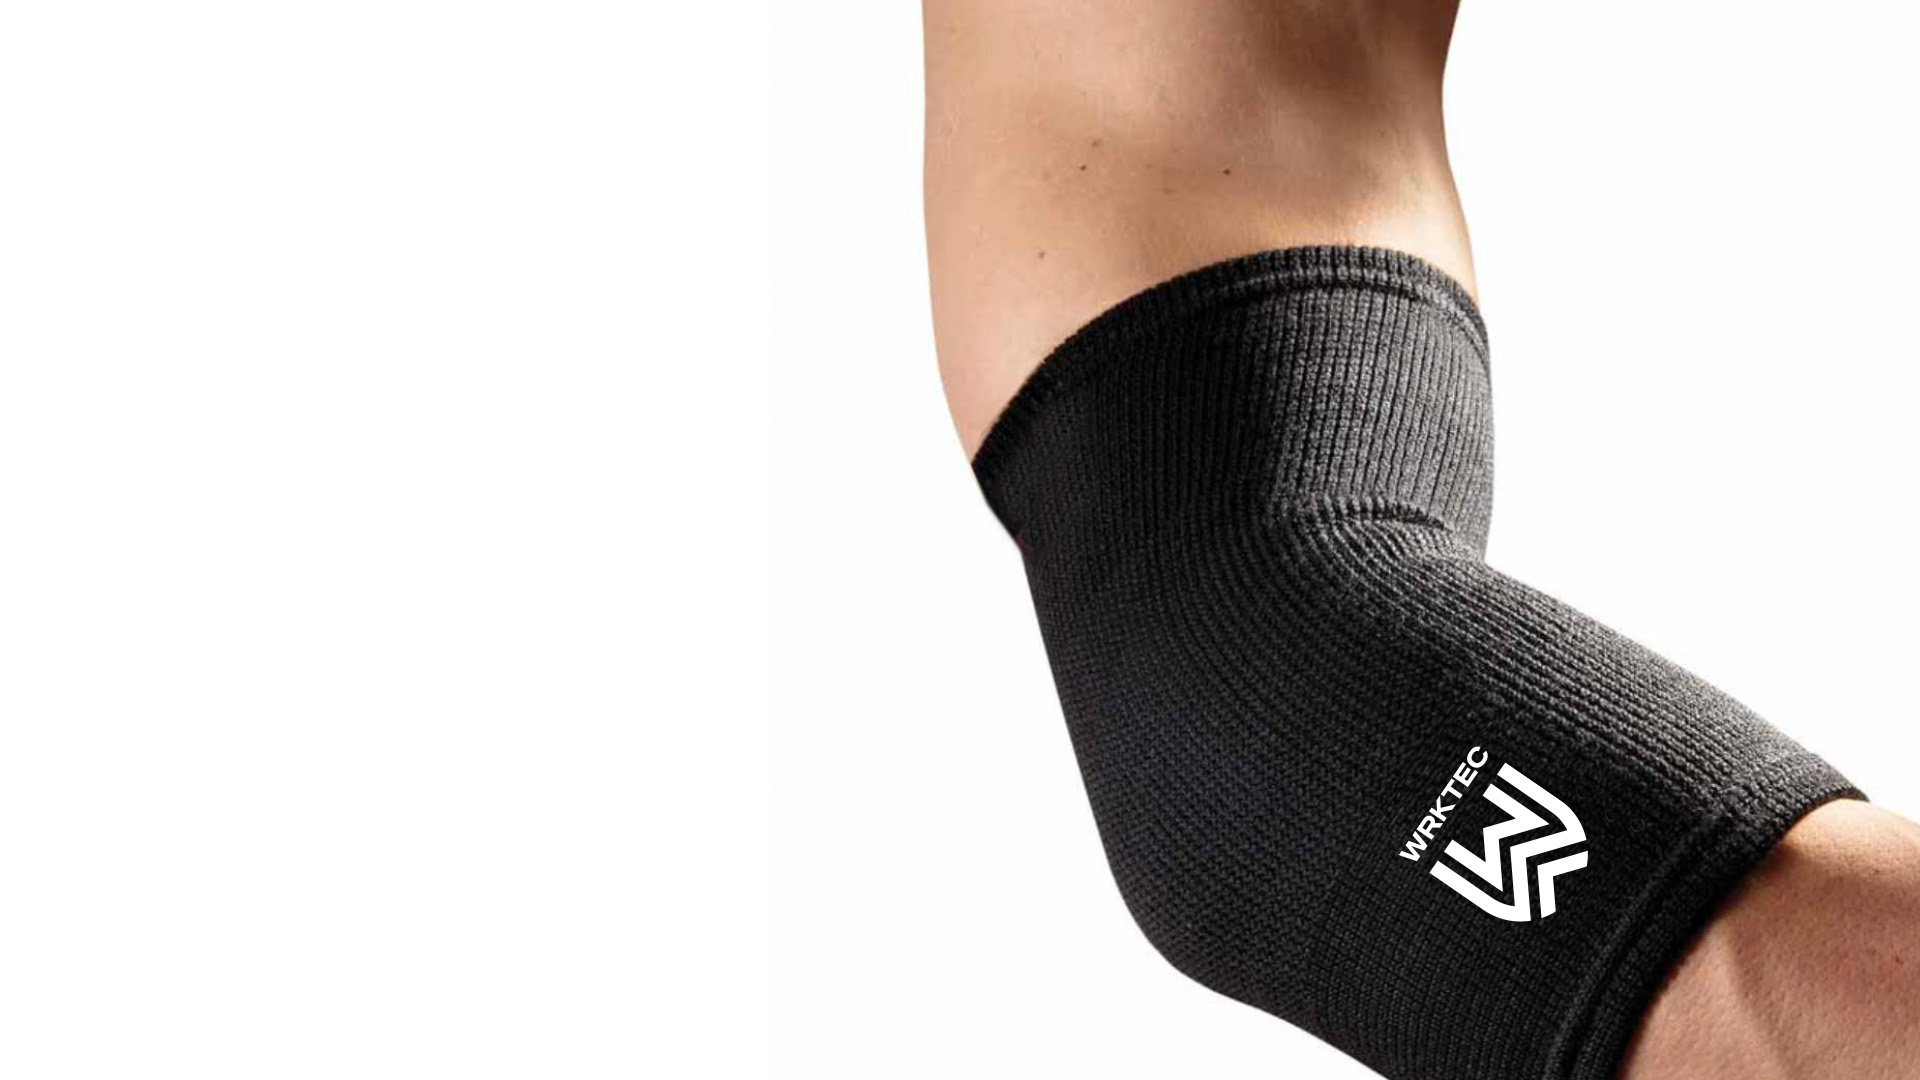 Robertstown-Wrktec-Compression-Elbow-Support